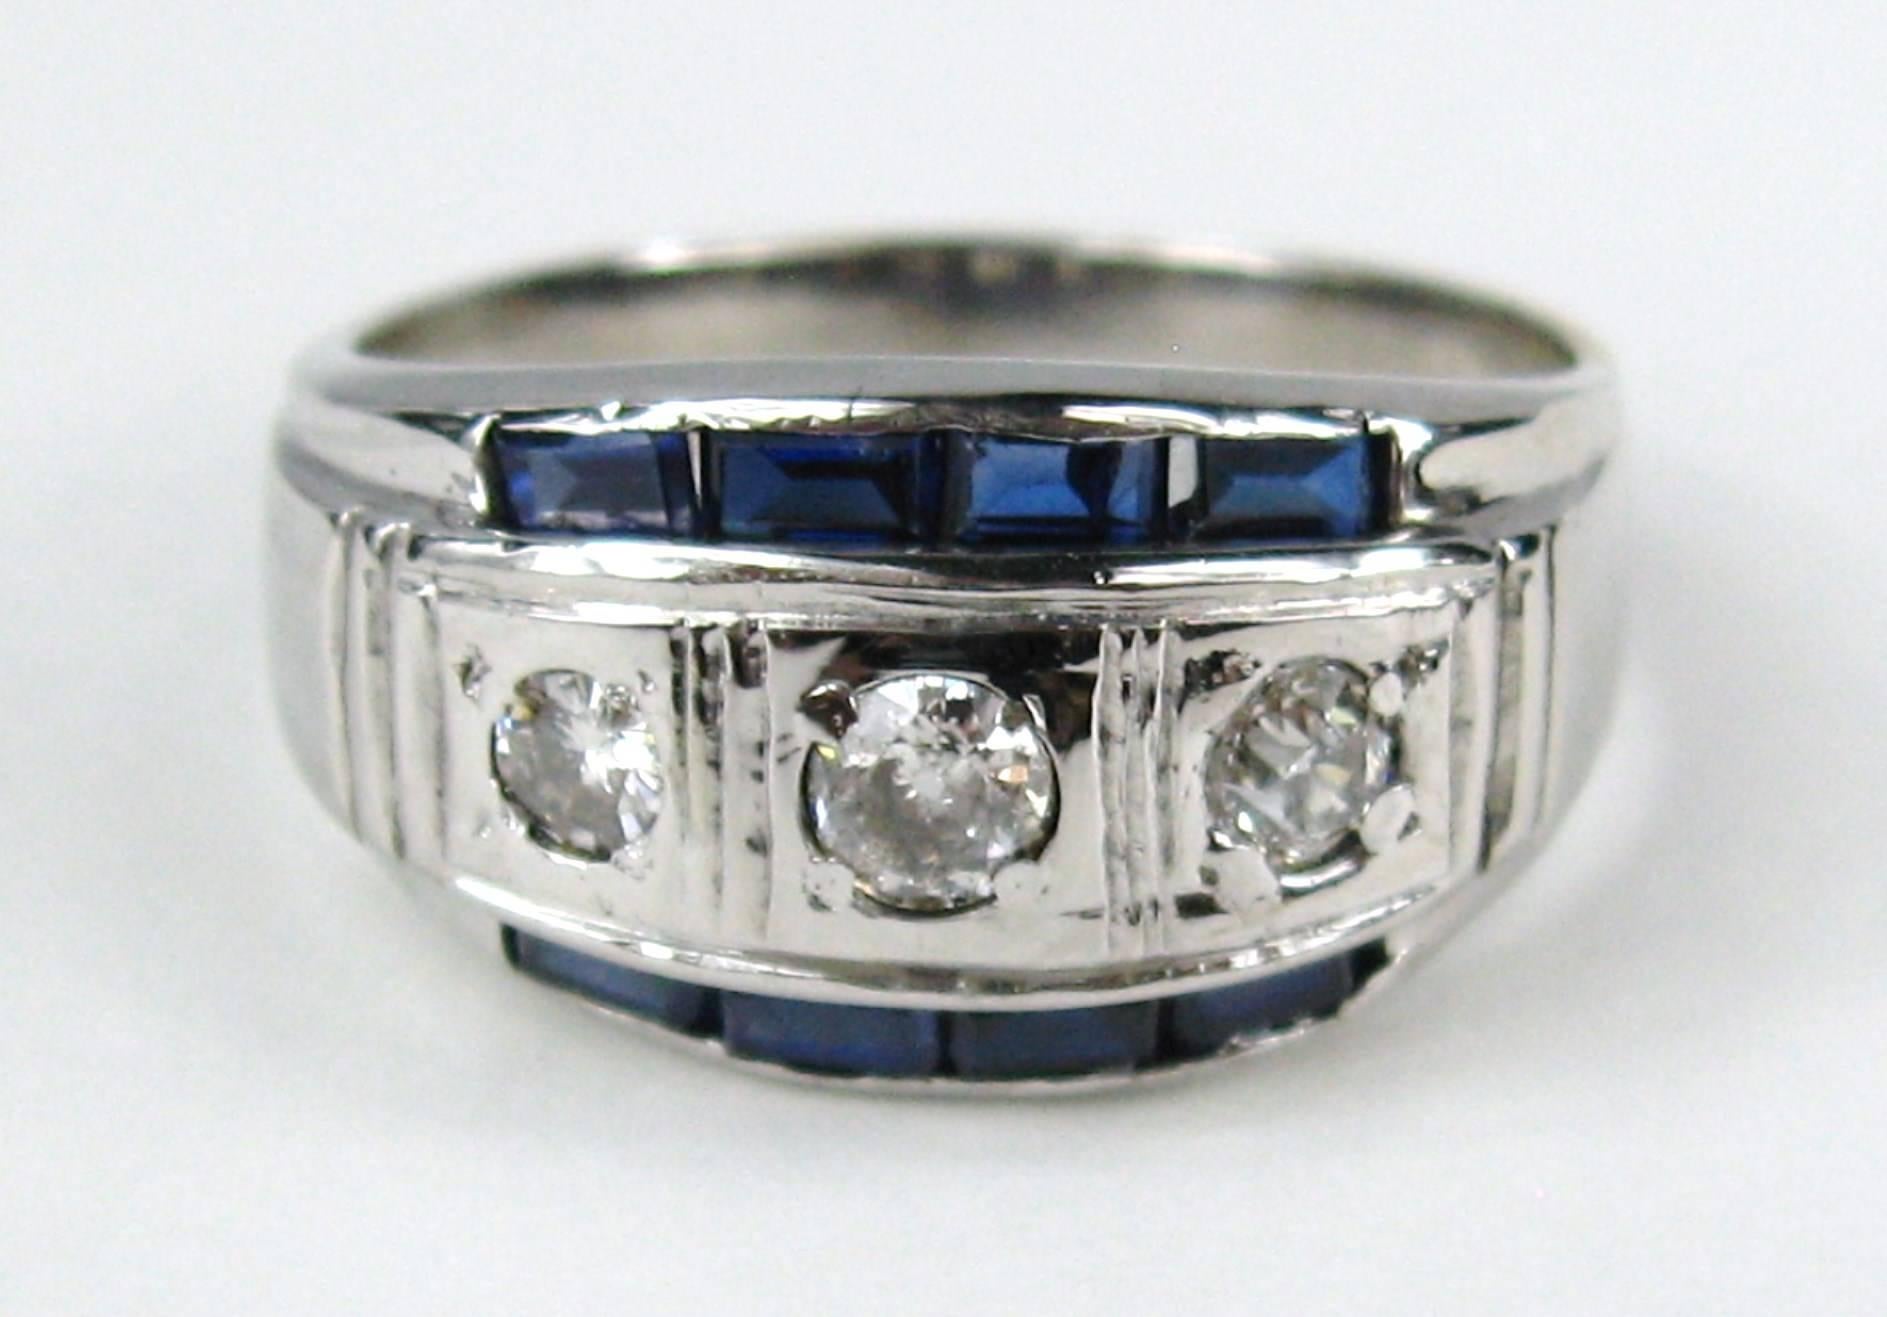 14K white gold early mid century diamond Ring, Can be worn by both a man or woman. The ring is a size 11 and can be sized by us or your jeweler. Diamonds equal .65 points (Old Euro Cut Diamonds) Blue sapphire colored stones .75 points. Be sure to